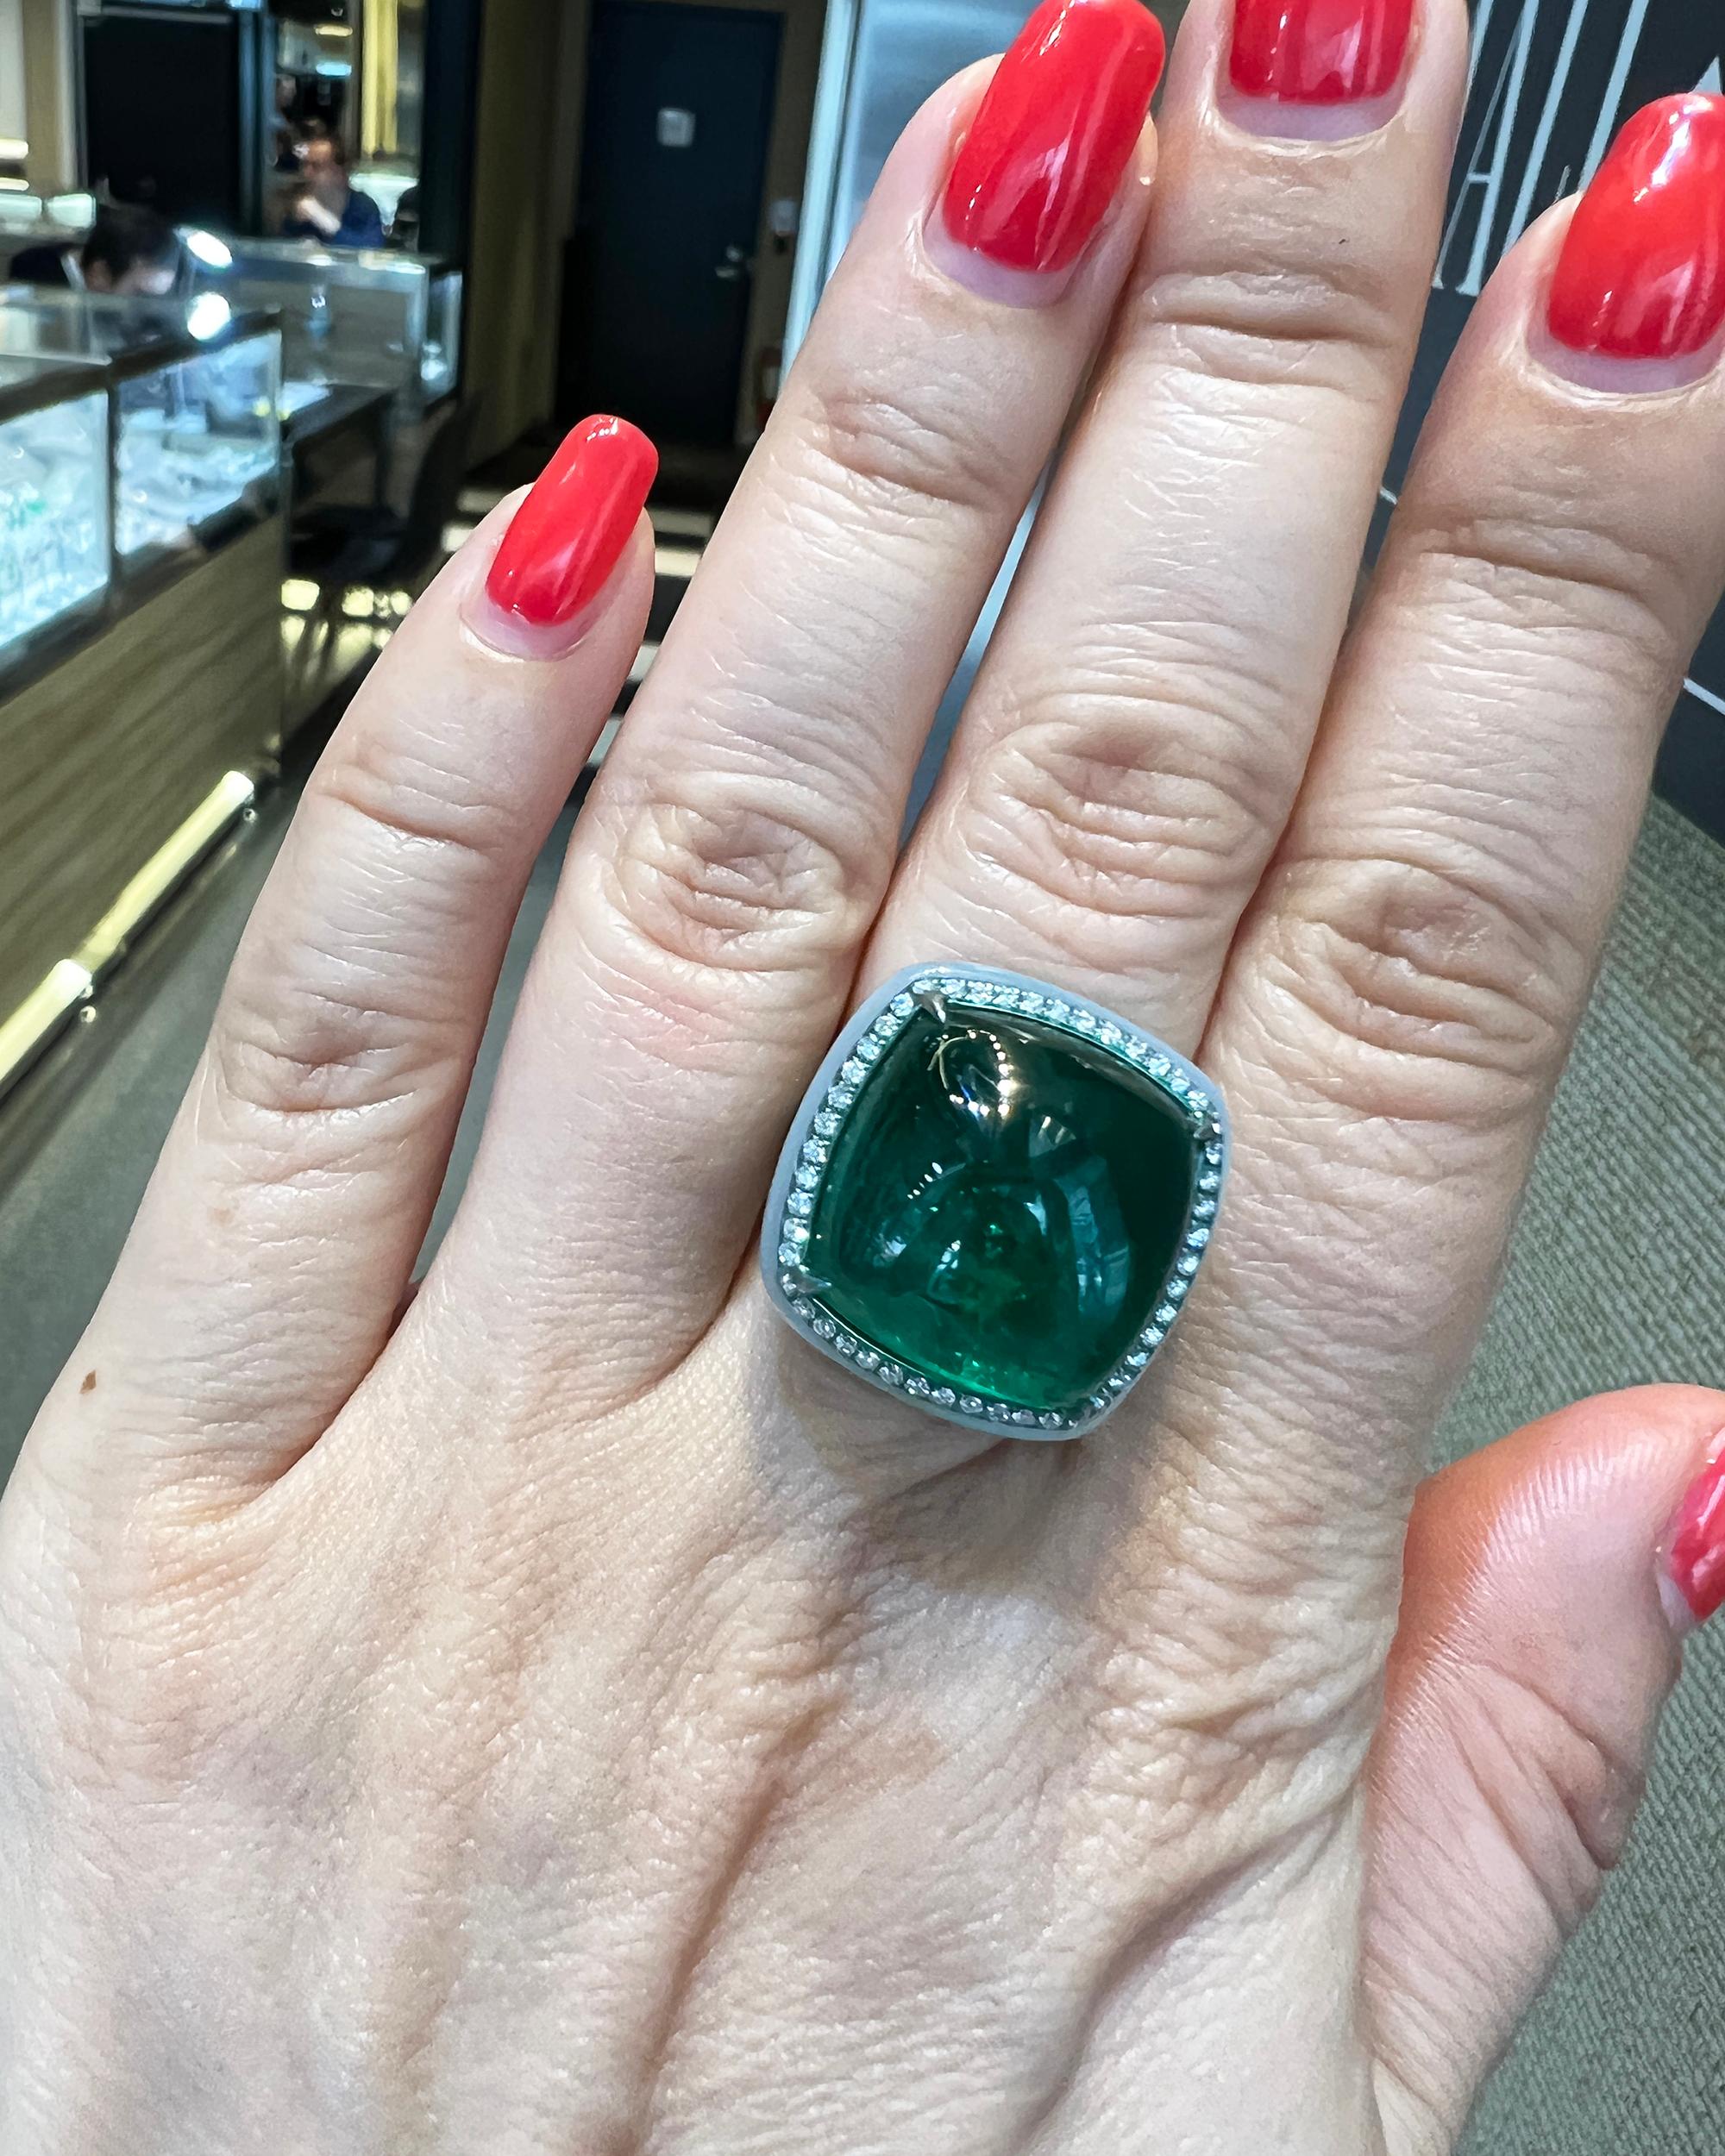 A stunning cocktail ring embellished with a cabochon emerald, opal and diamonds and set in a titanium mounting.
The ring is featuring:
17.76 carat center cabochon emerald, certified by GRS stating that it's of Colombian origin with moderate clarity